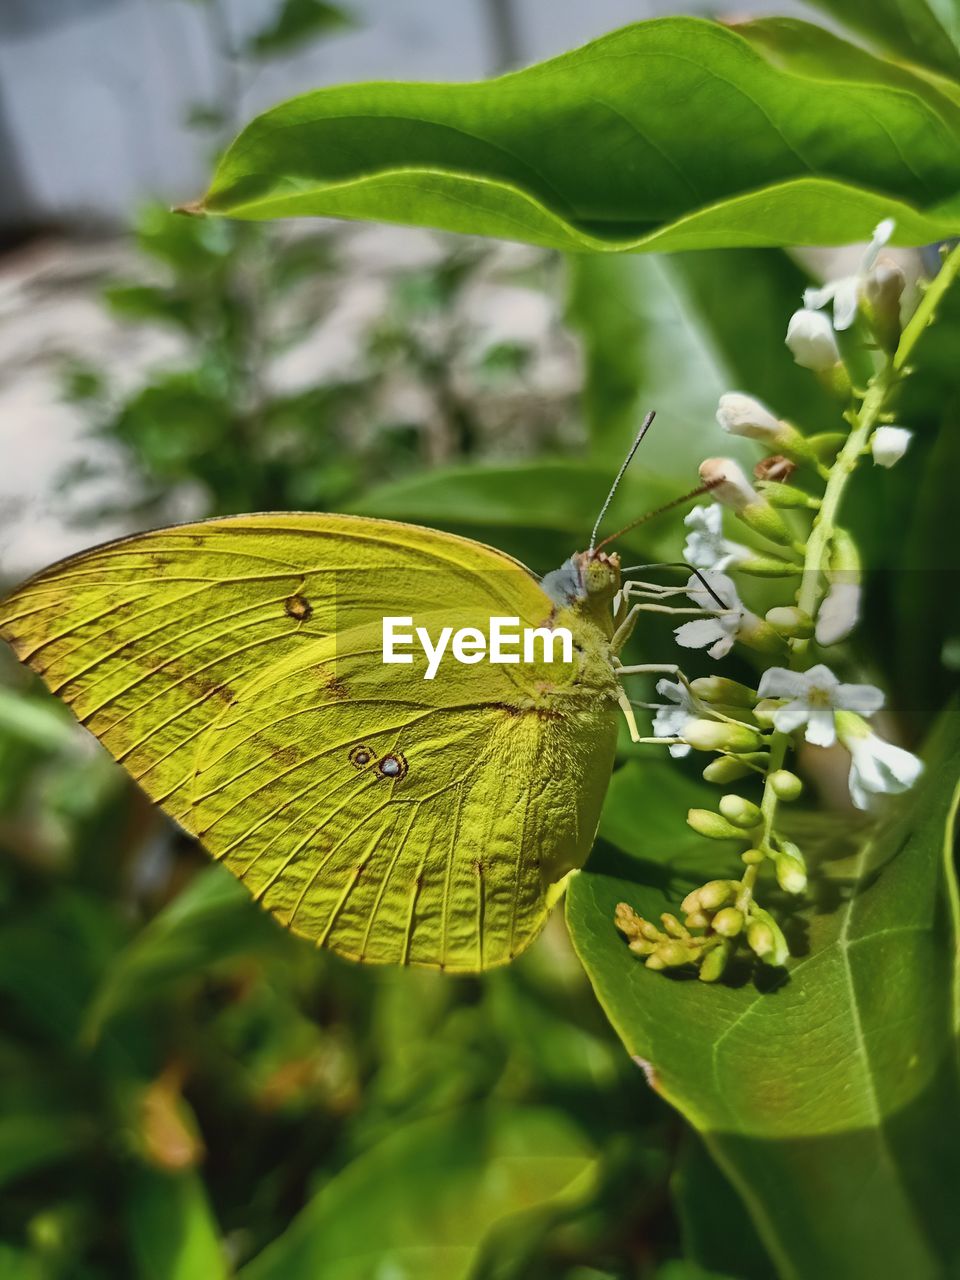 CLOSE-UP OF BUTTERFLY POLLINATING ON LEAVES